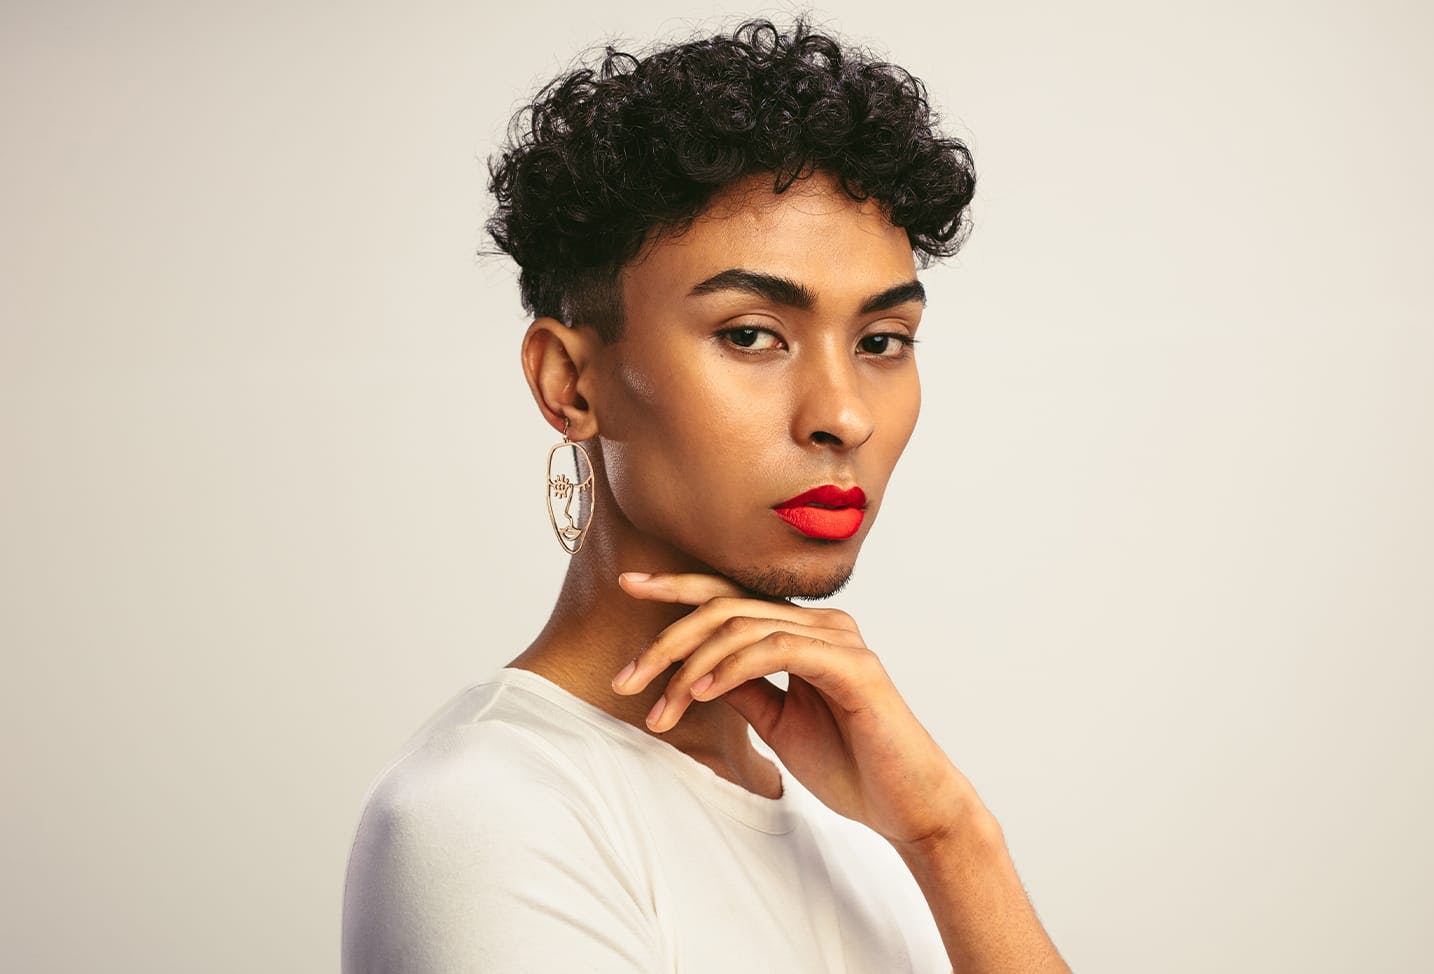 model with dark short curly hair with gold earring and red lipstick